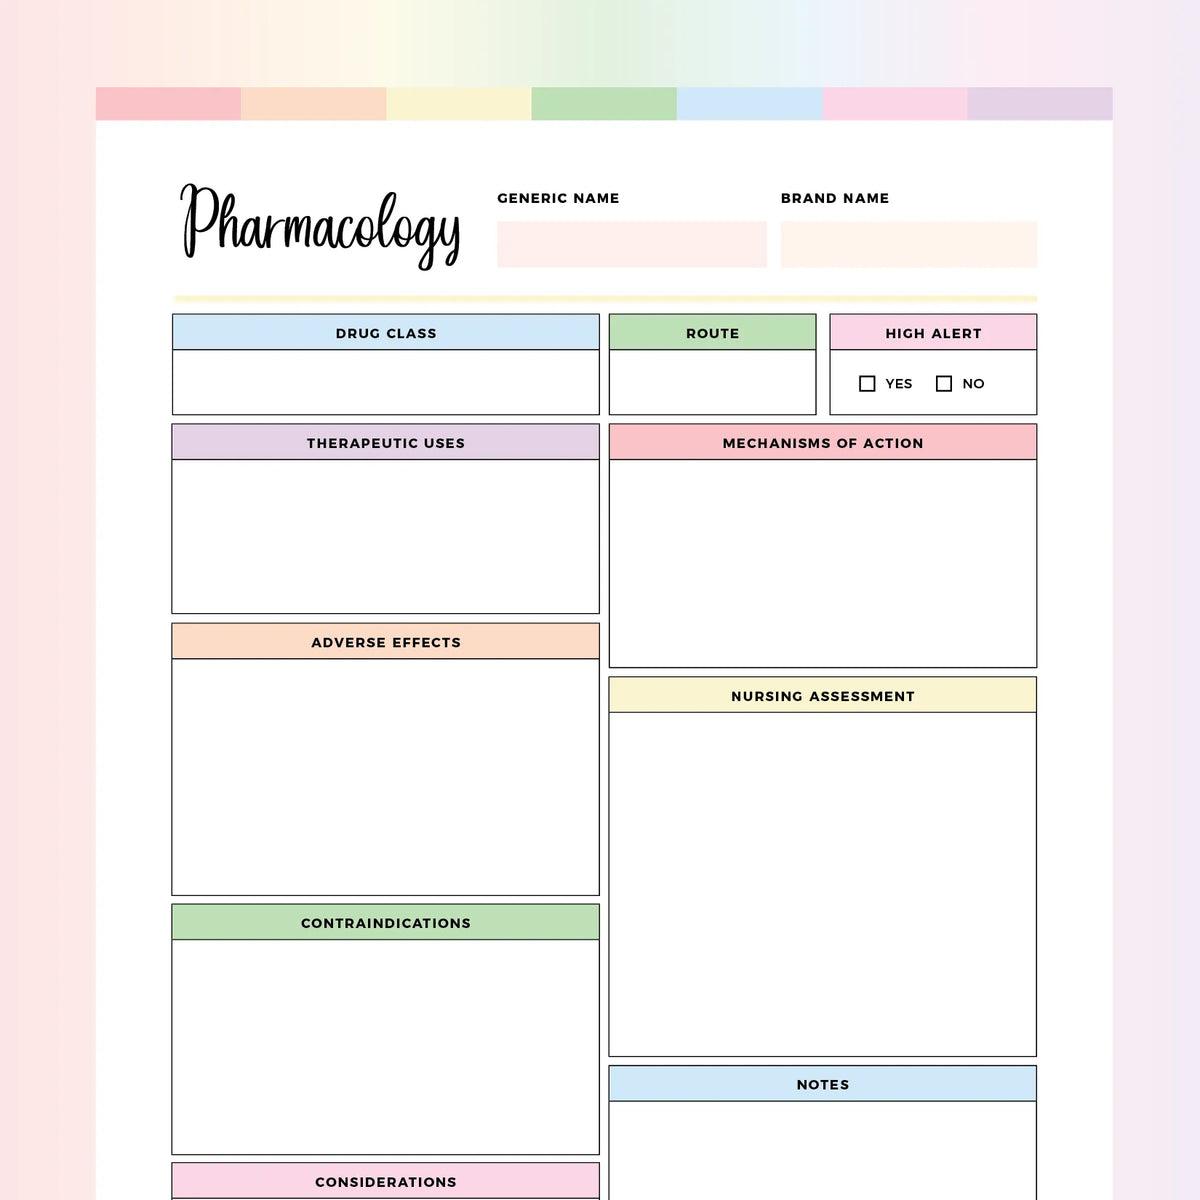 pharmacology-template-printable-instant-download-pdf-a4-and-us-letter-plan-print-land